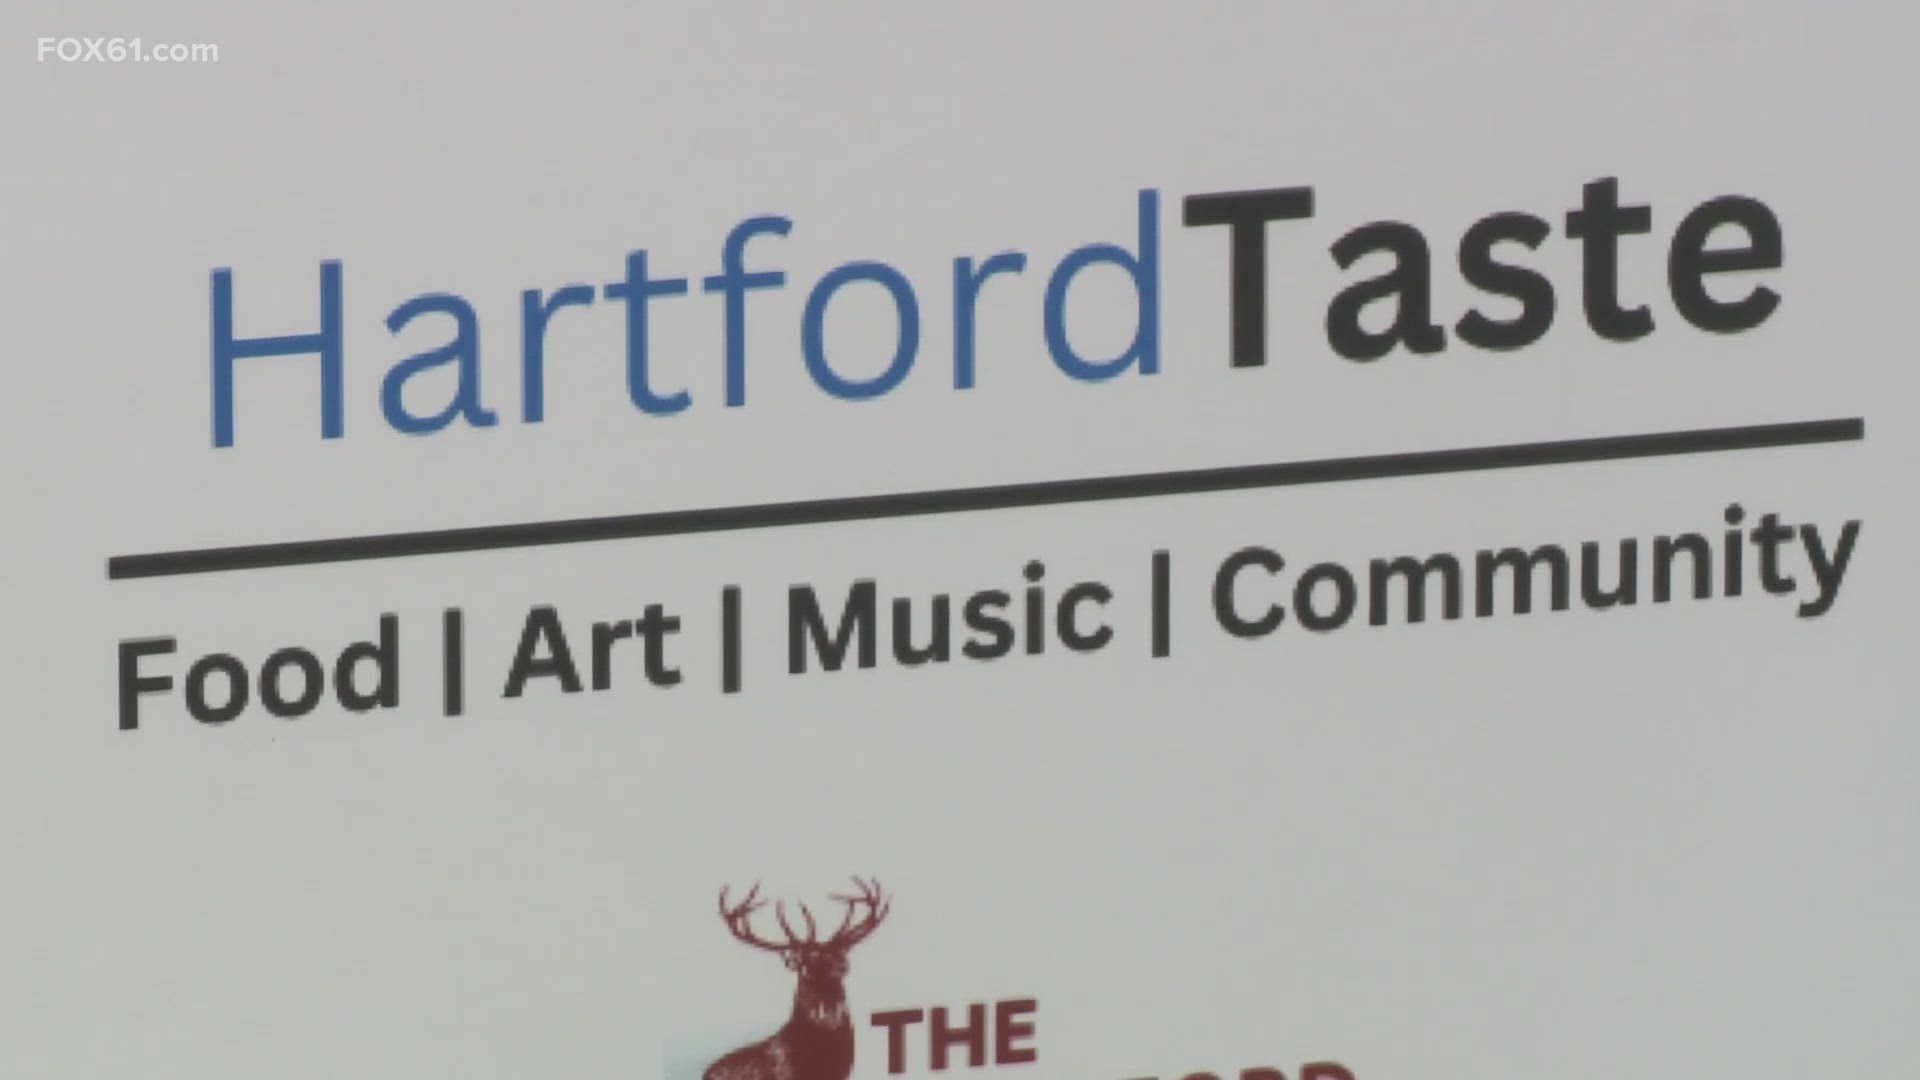 The event celebrates Hartford's food, music, businesses, and cultural diversity.